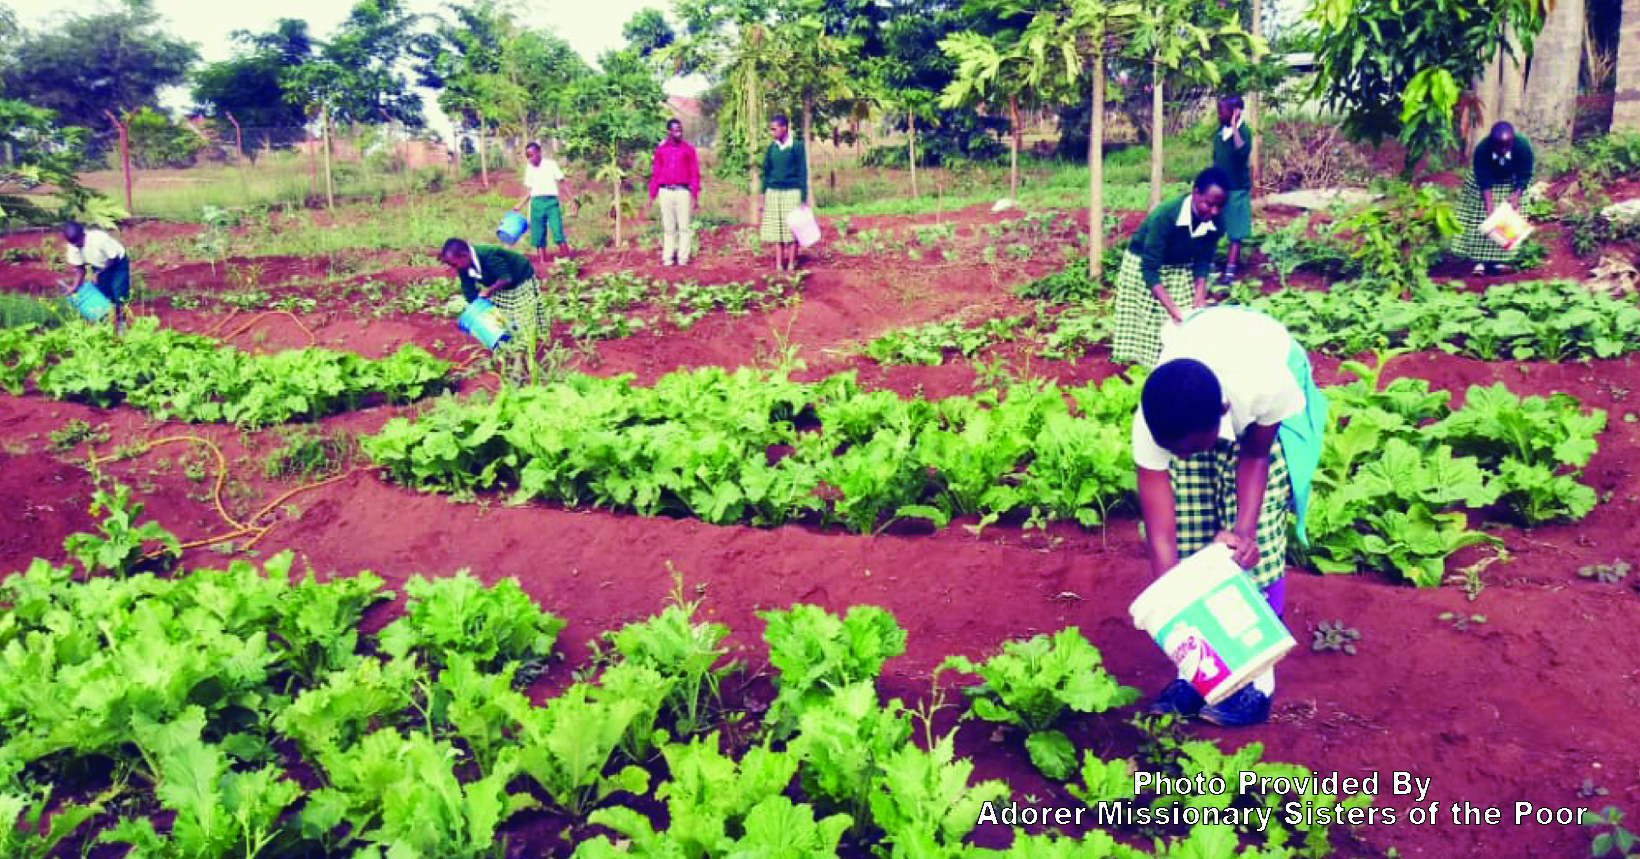 A group of students are working in their vegetable garden. With the help from the Foundation, the students are able to produce vegetable for themselves.